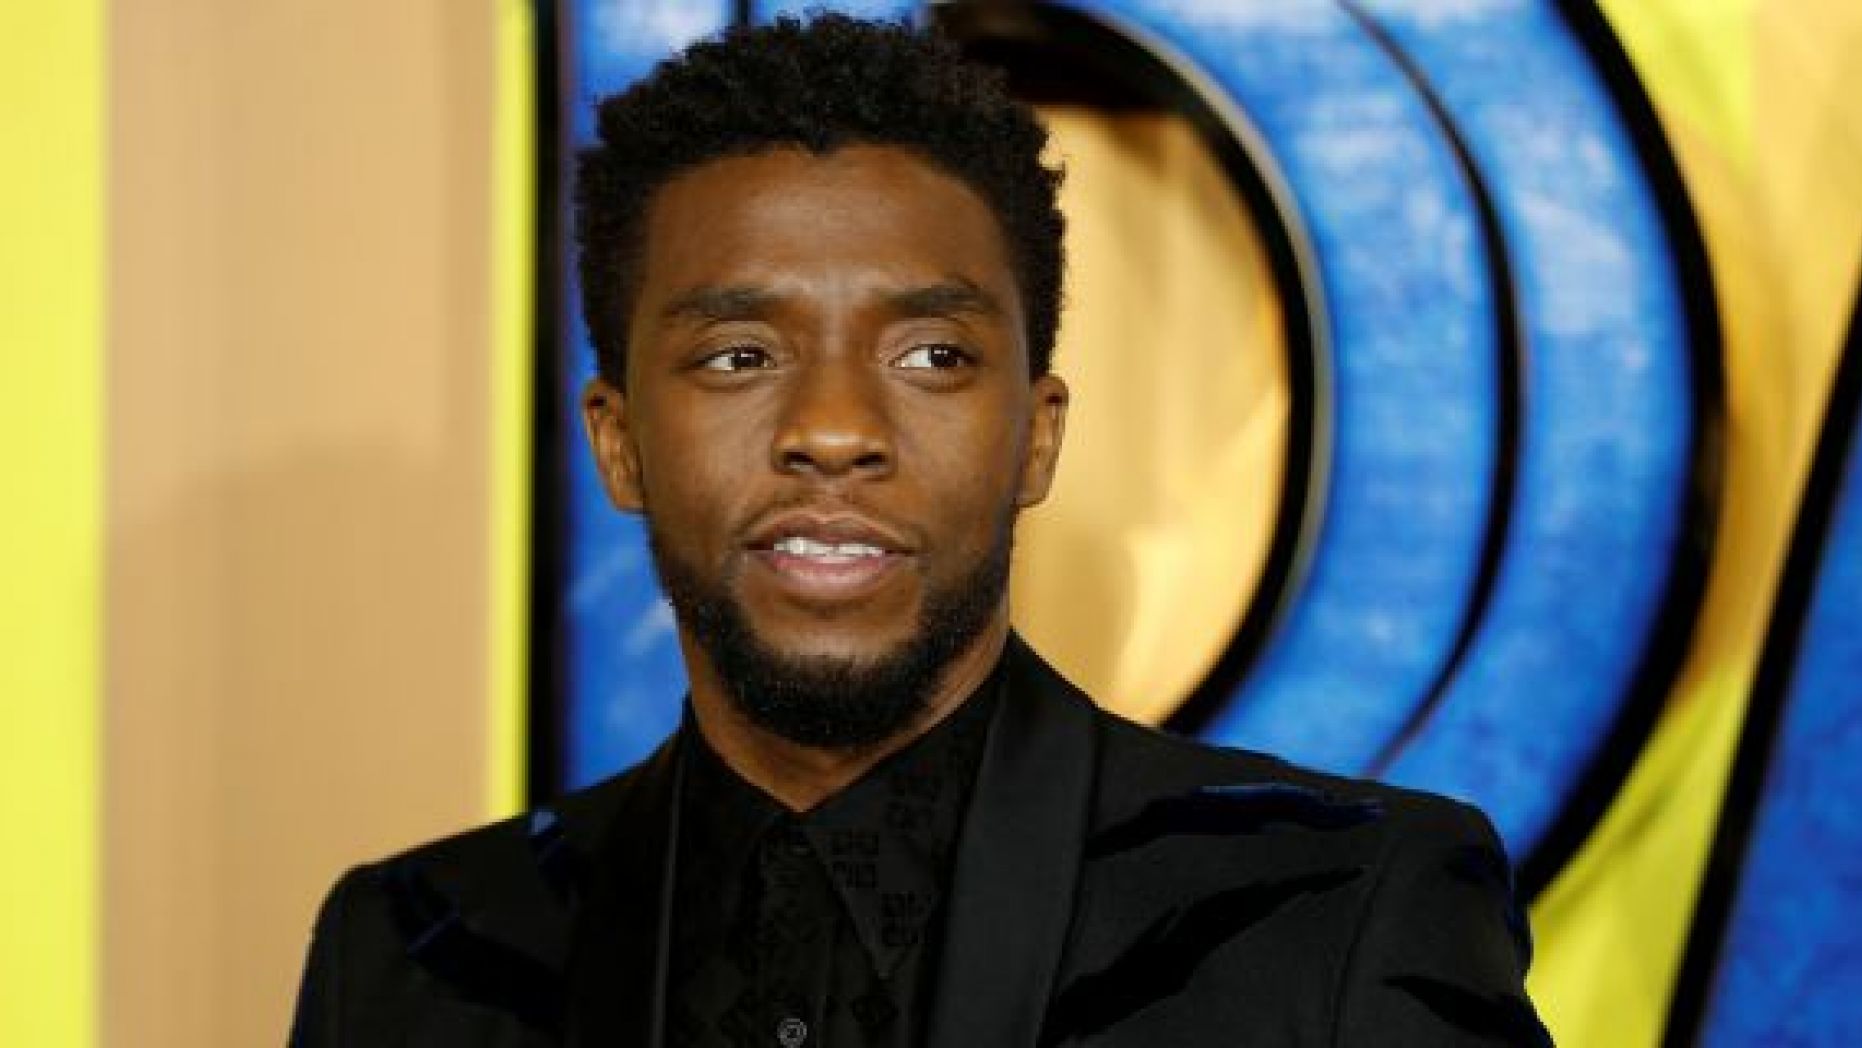 "Chadwick Boseman could win the prize for "Male Movie Star of 2018 when the 2018 E! People's Choice Awards kick off Nov. 11. 